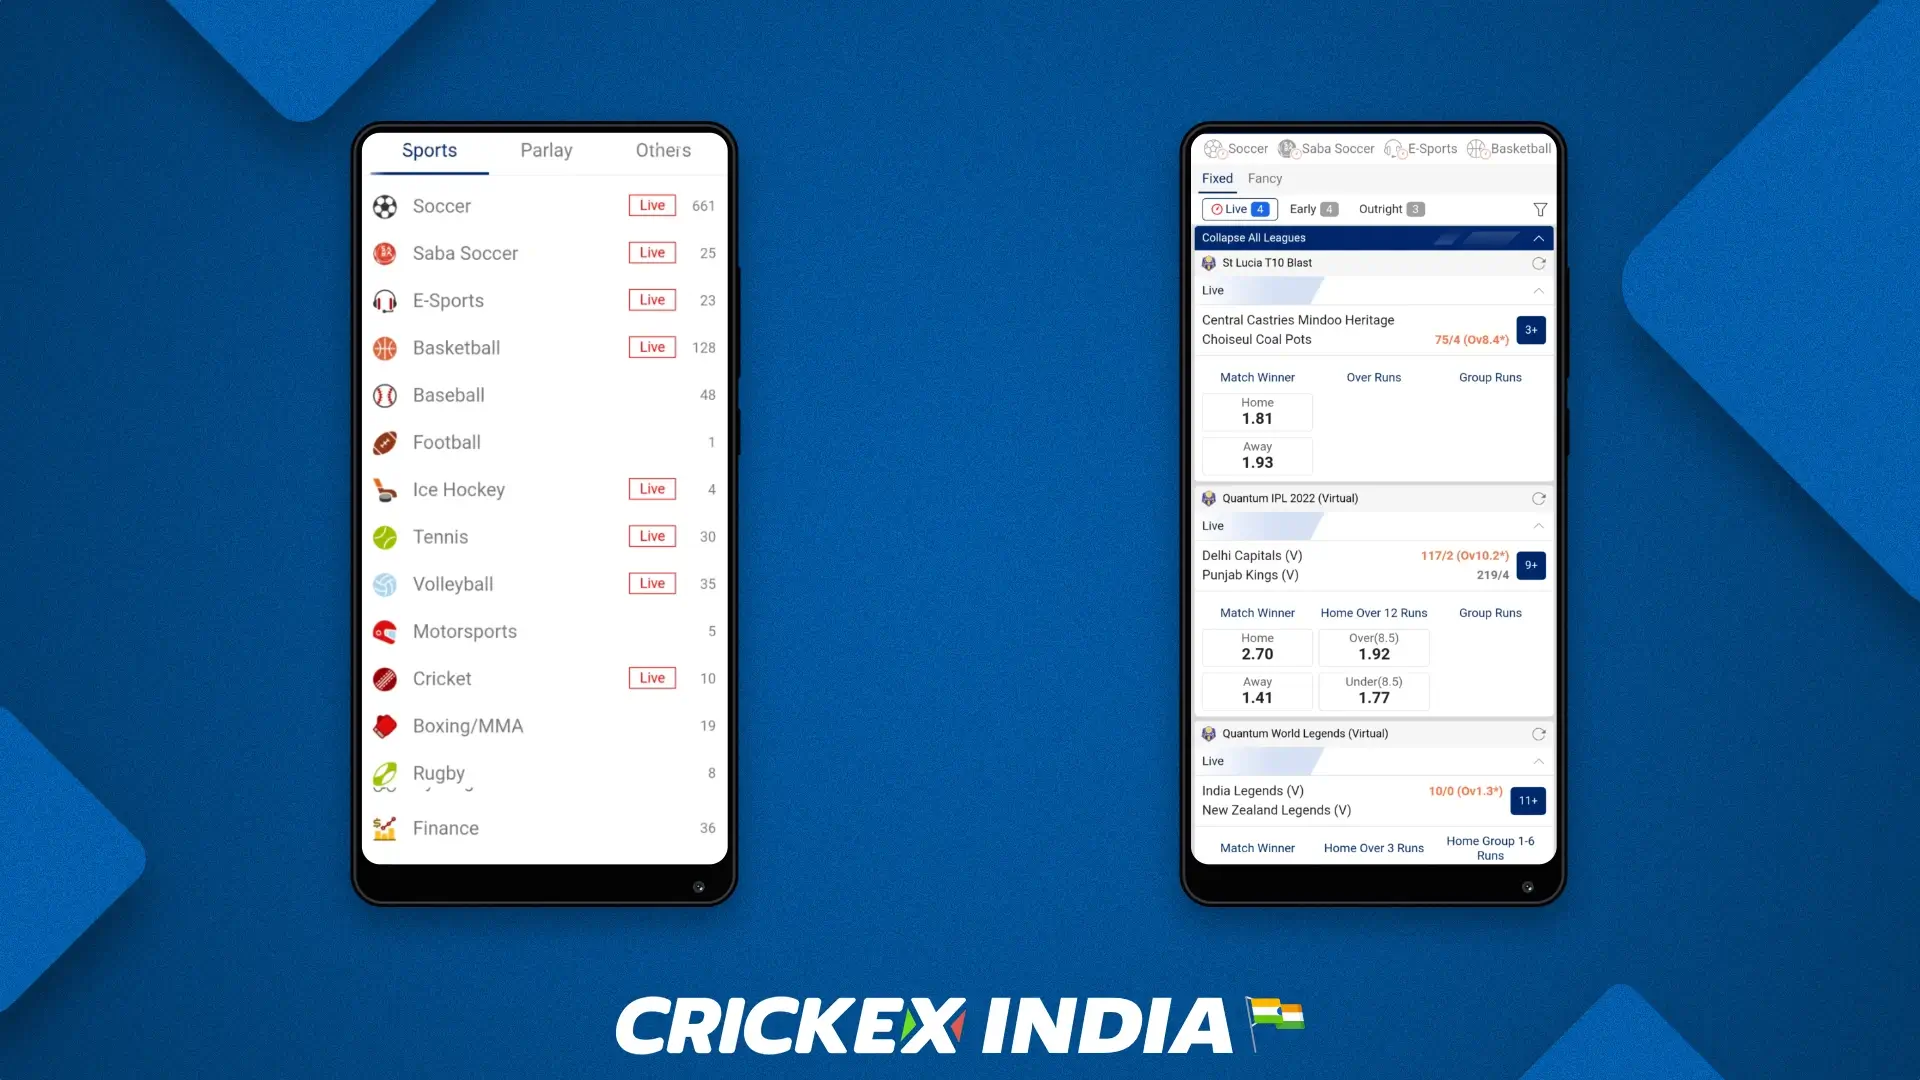 Crickex app offers a variety of sports that you can bet on, including cricket, tennis, soccer, and more